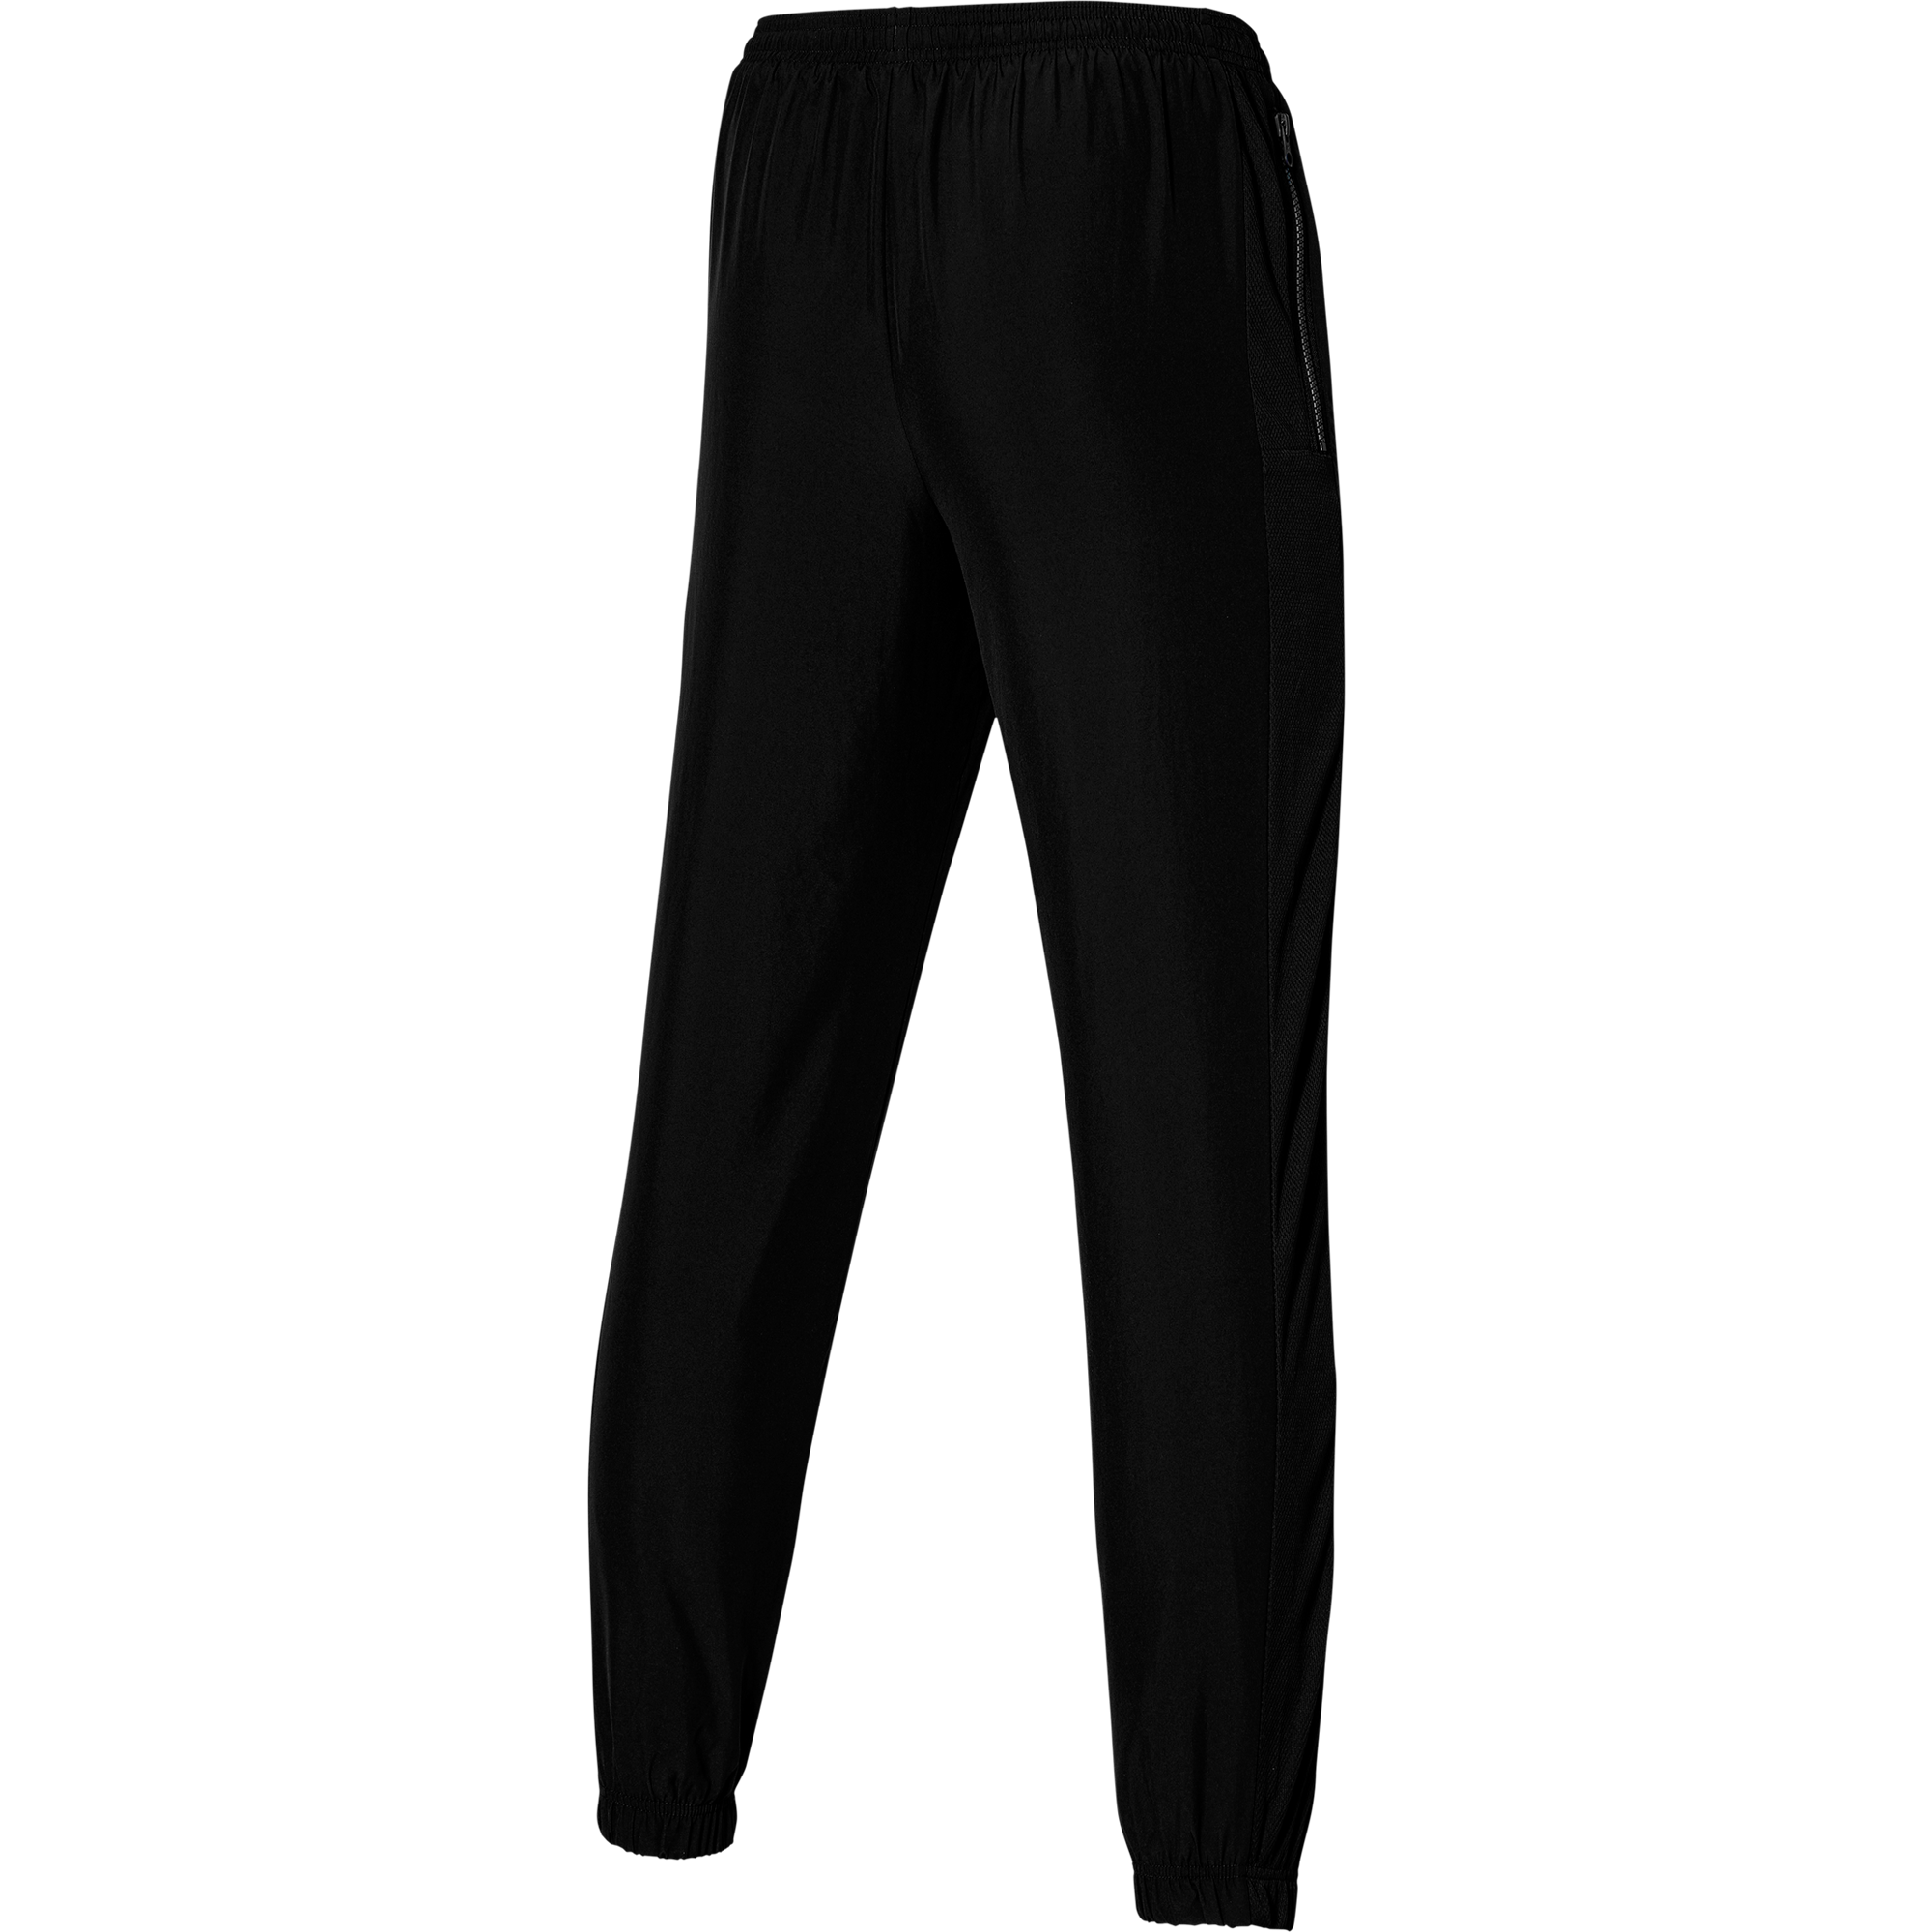 Academy 23 Woven Track Pant (Youth)